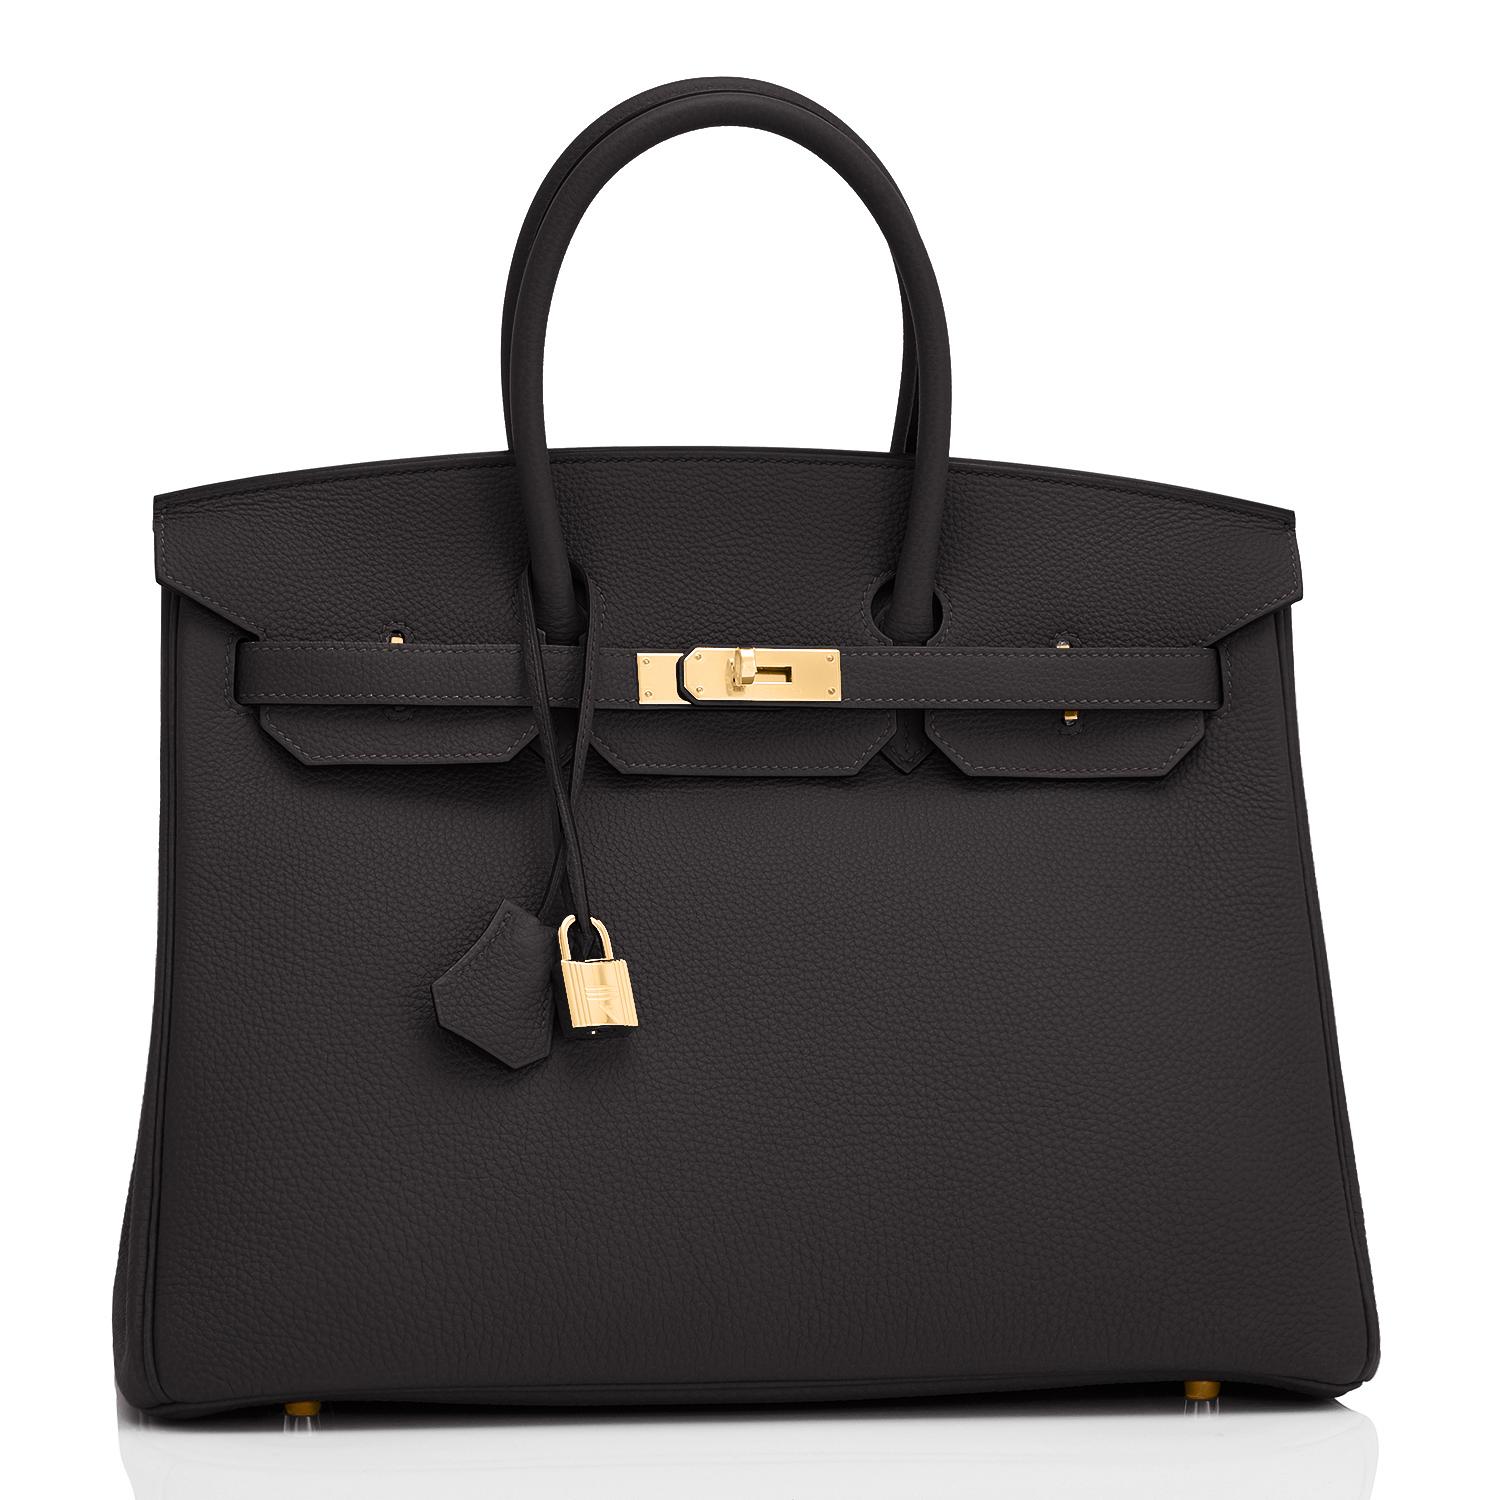 Wire price only
Chicjoy is pleased to present this Hermes Birkin 35cm Black Togo Gold Hardware Bag
The Ultimate statement gift for a lifetime!
Brand New in Box. Store fresh. Pristine Condition (with plastic on hardware).
Just purchased from Hermes